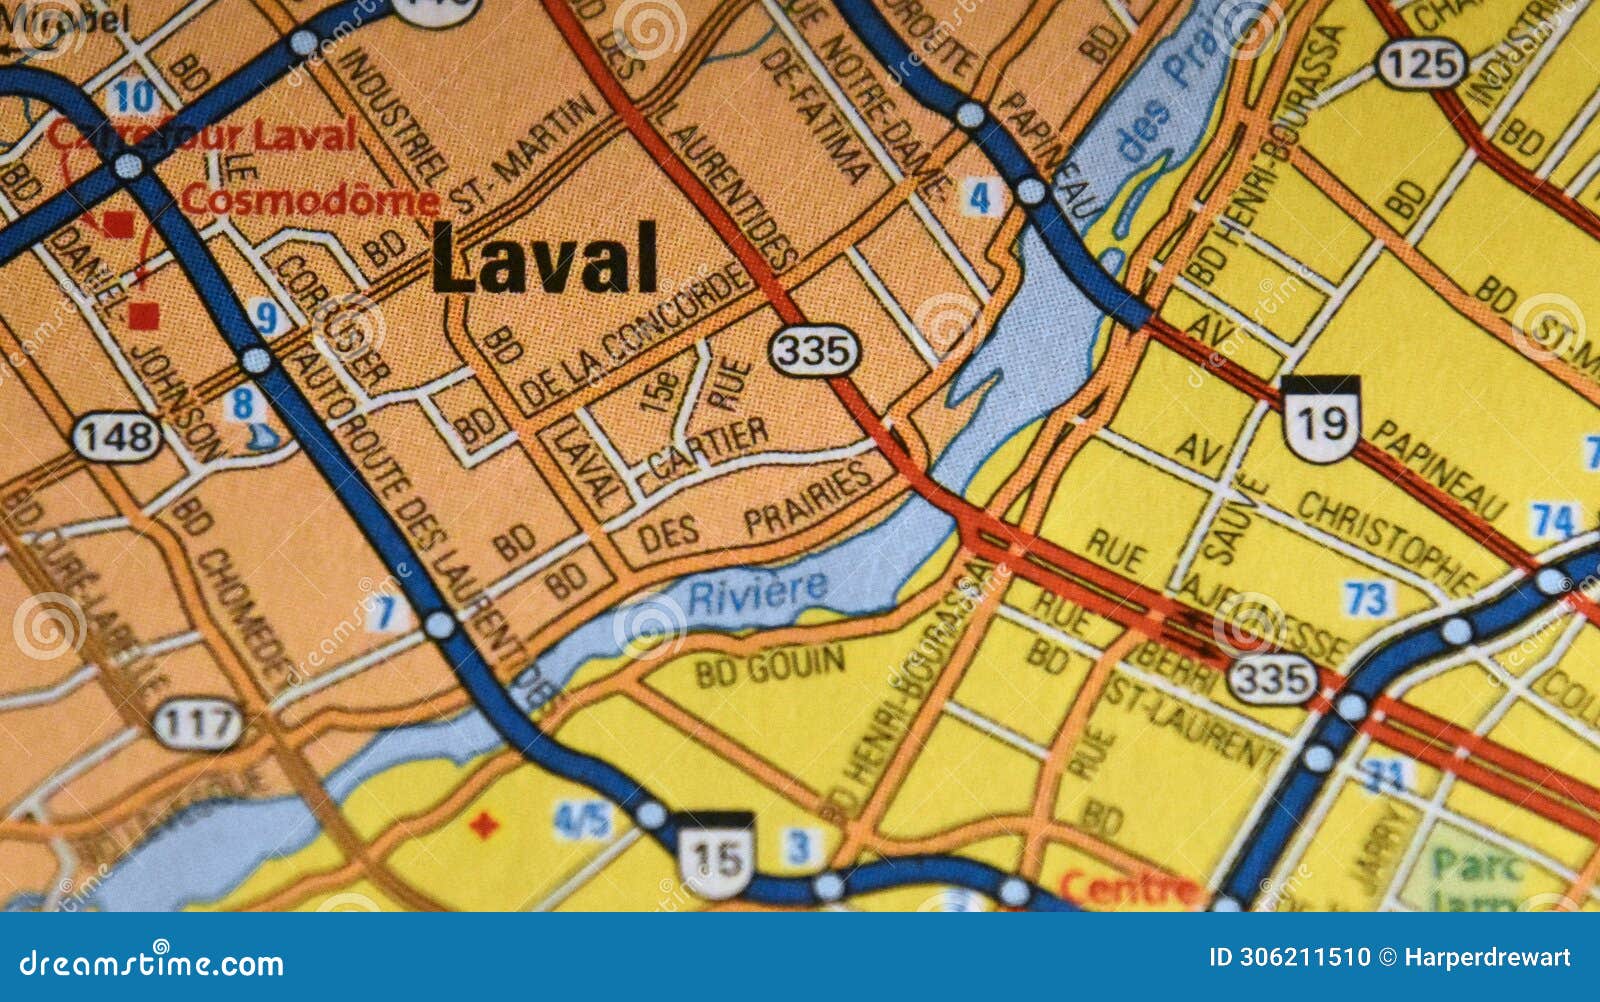 map image of laval, quebec, canada